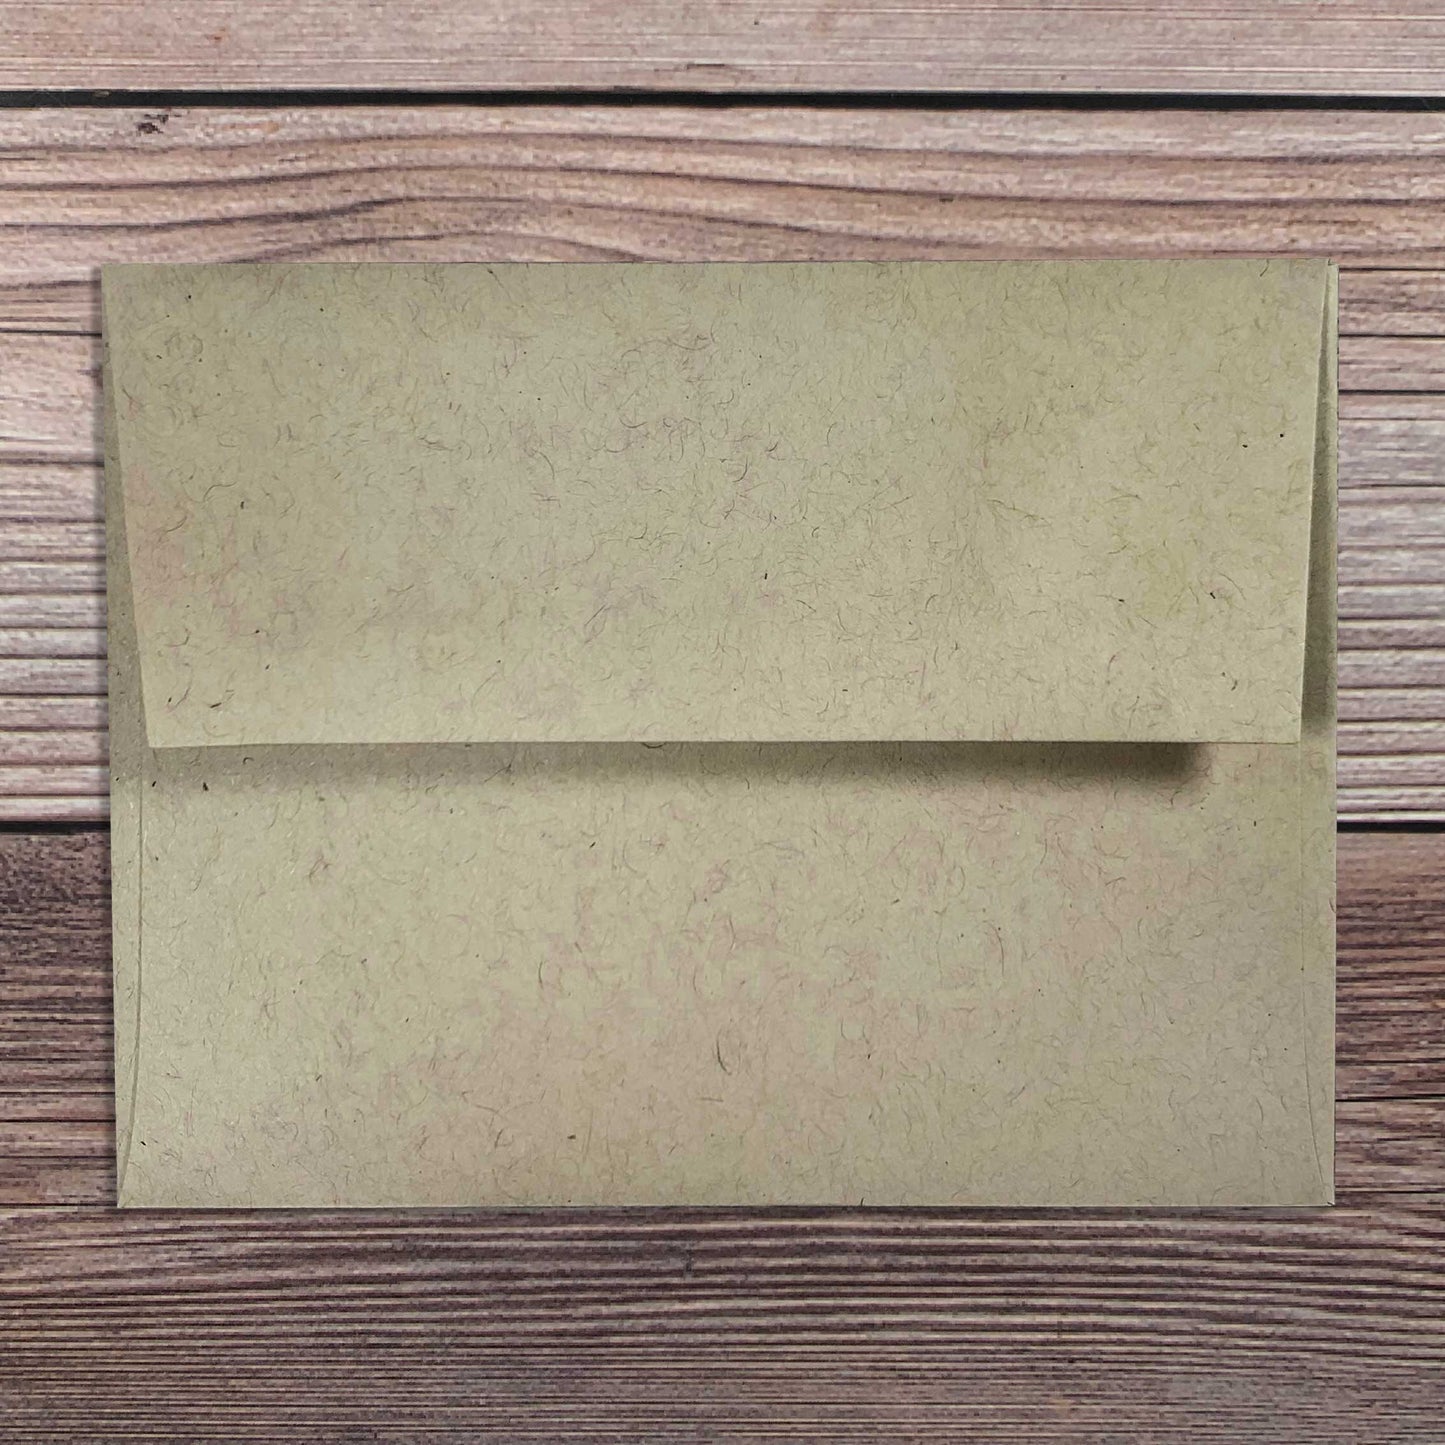 Greeting Card envelope, kraft color, square flap, included with letterpress Father's Day card.